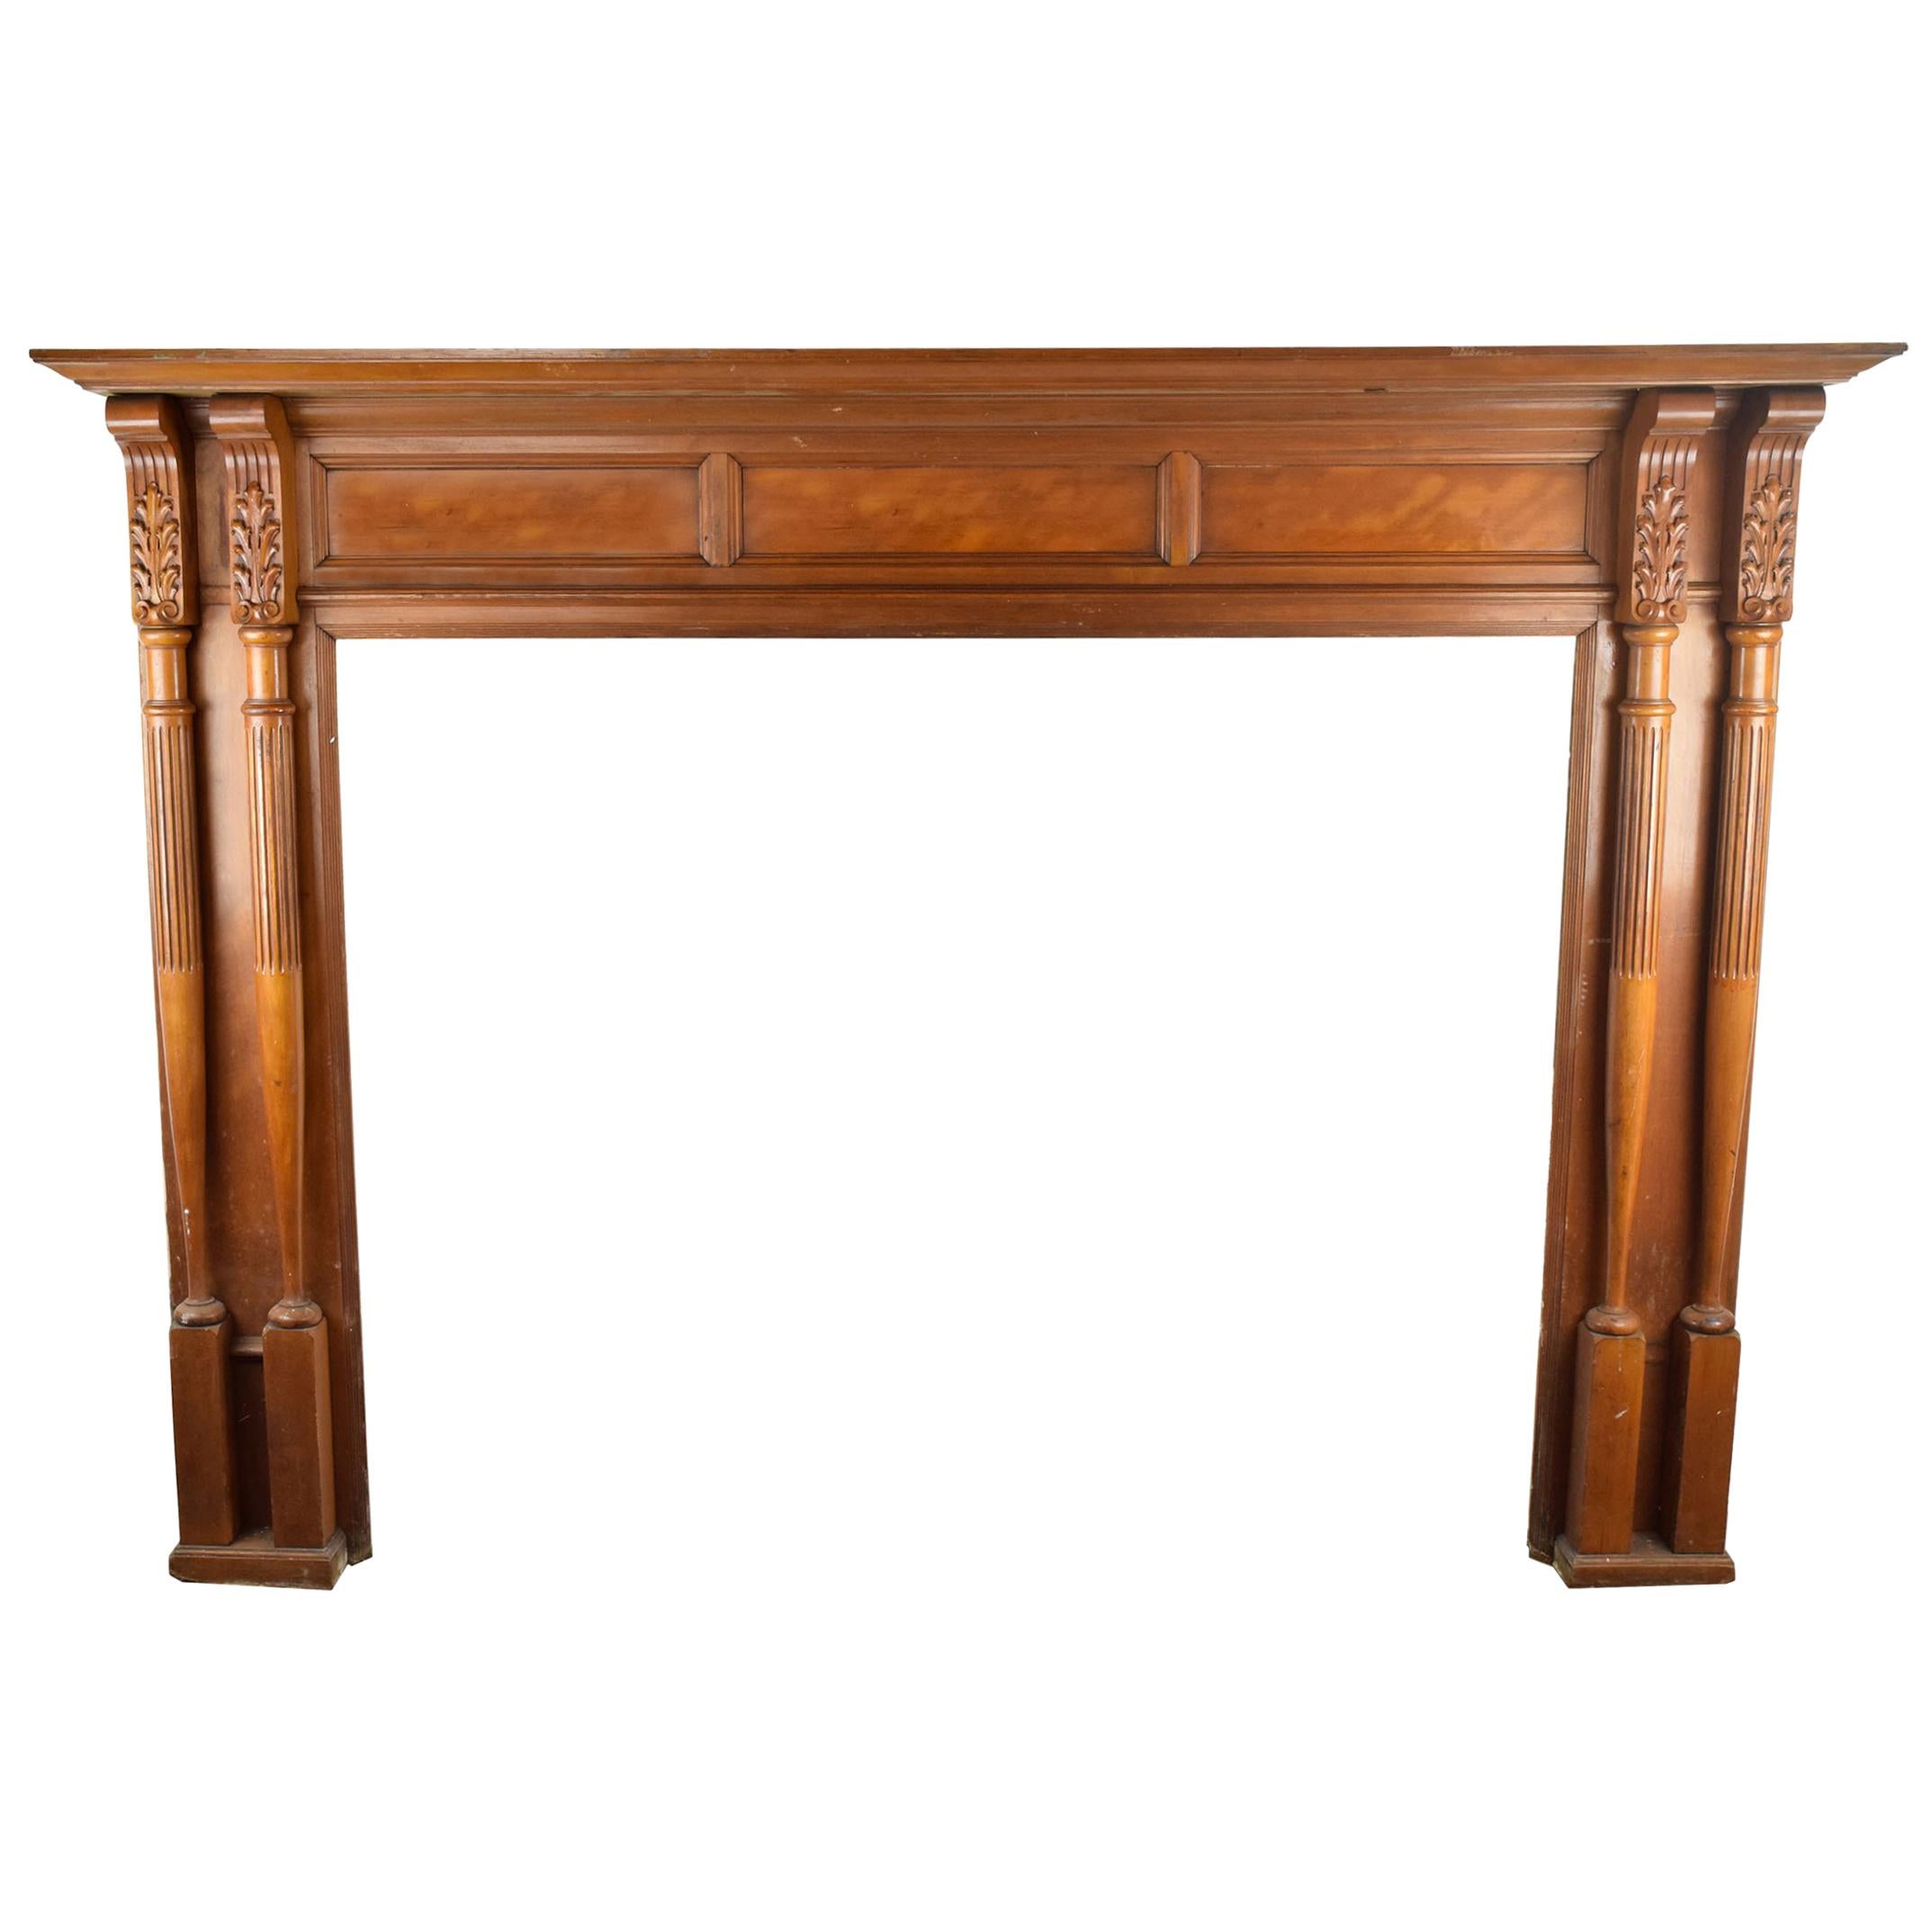 Maple Mantel with Carved Spindles